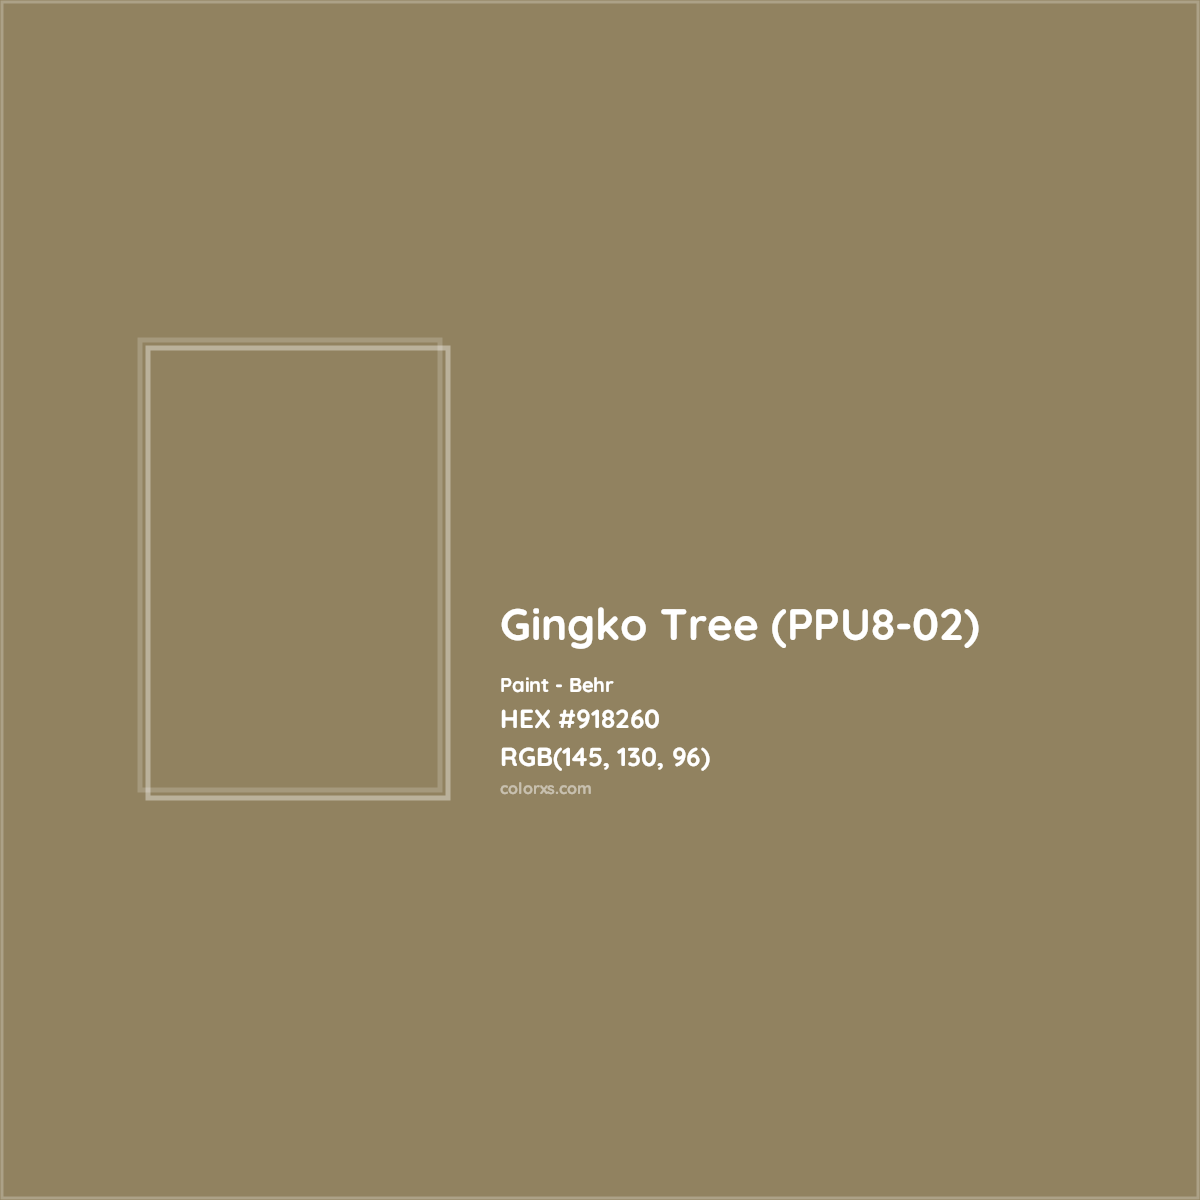 HEX #918260 Gingko Tree (PPU8-02) Paint Behr - Color Code